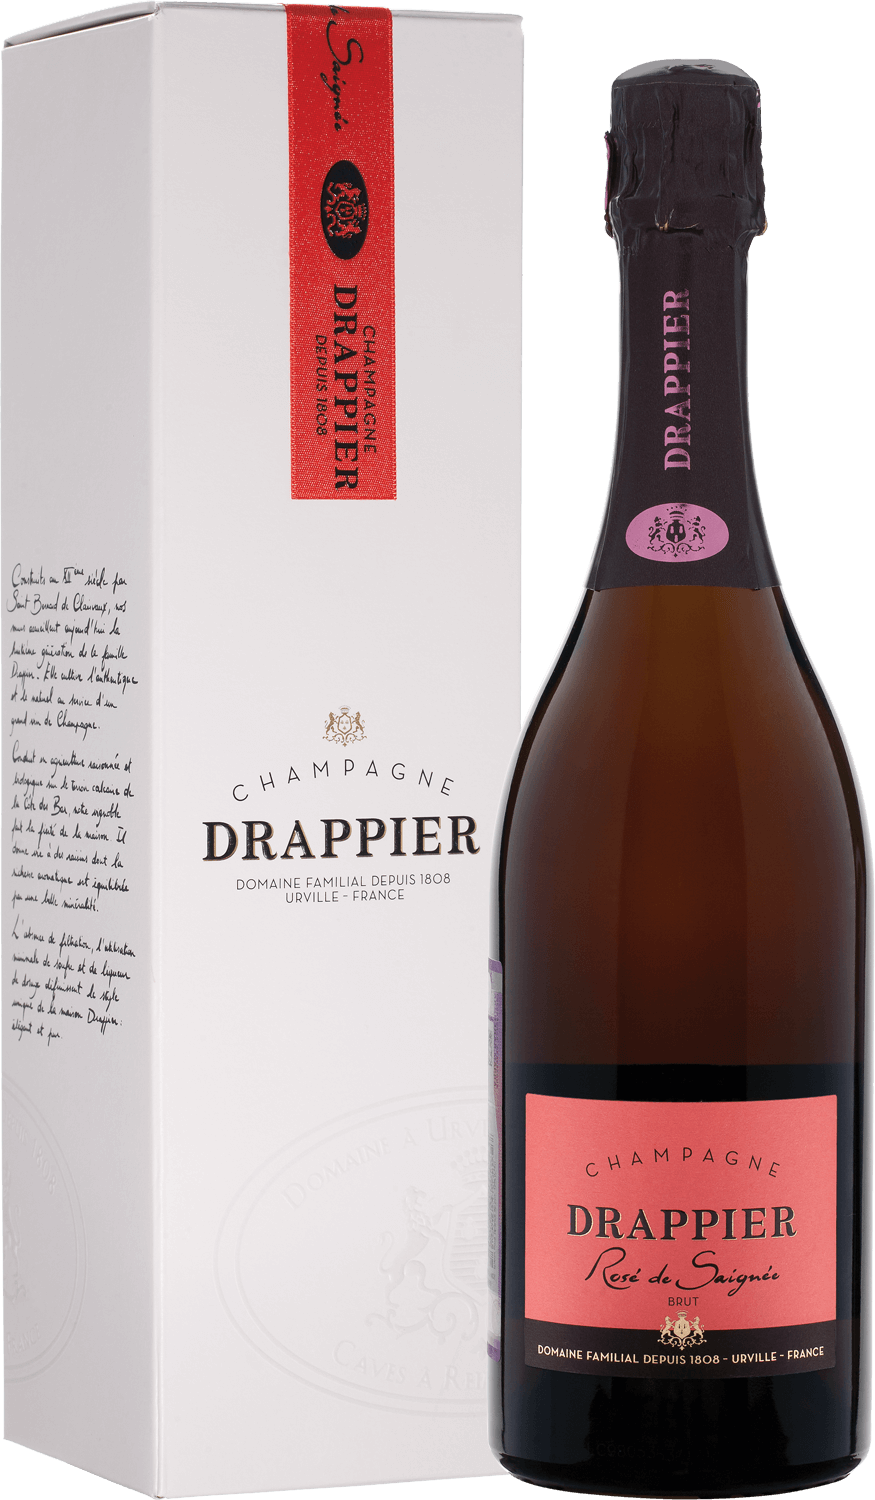 Drappier Brut Rose Champagne AOP in gift box drappier carte d’or brut champagne aop